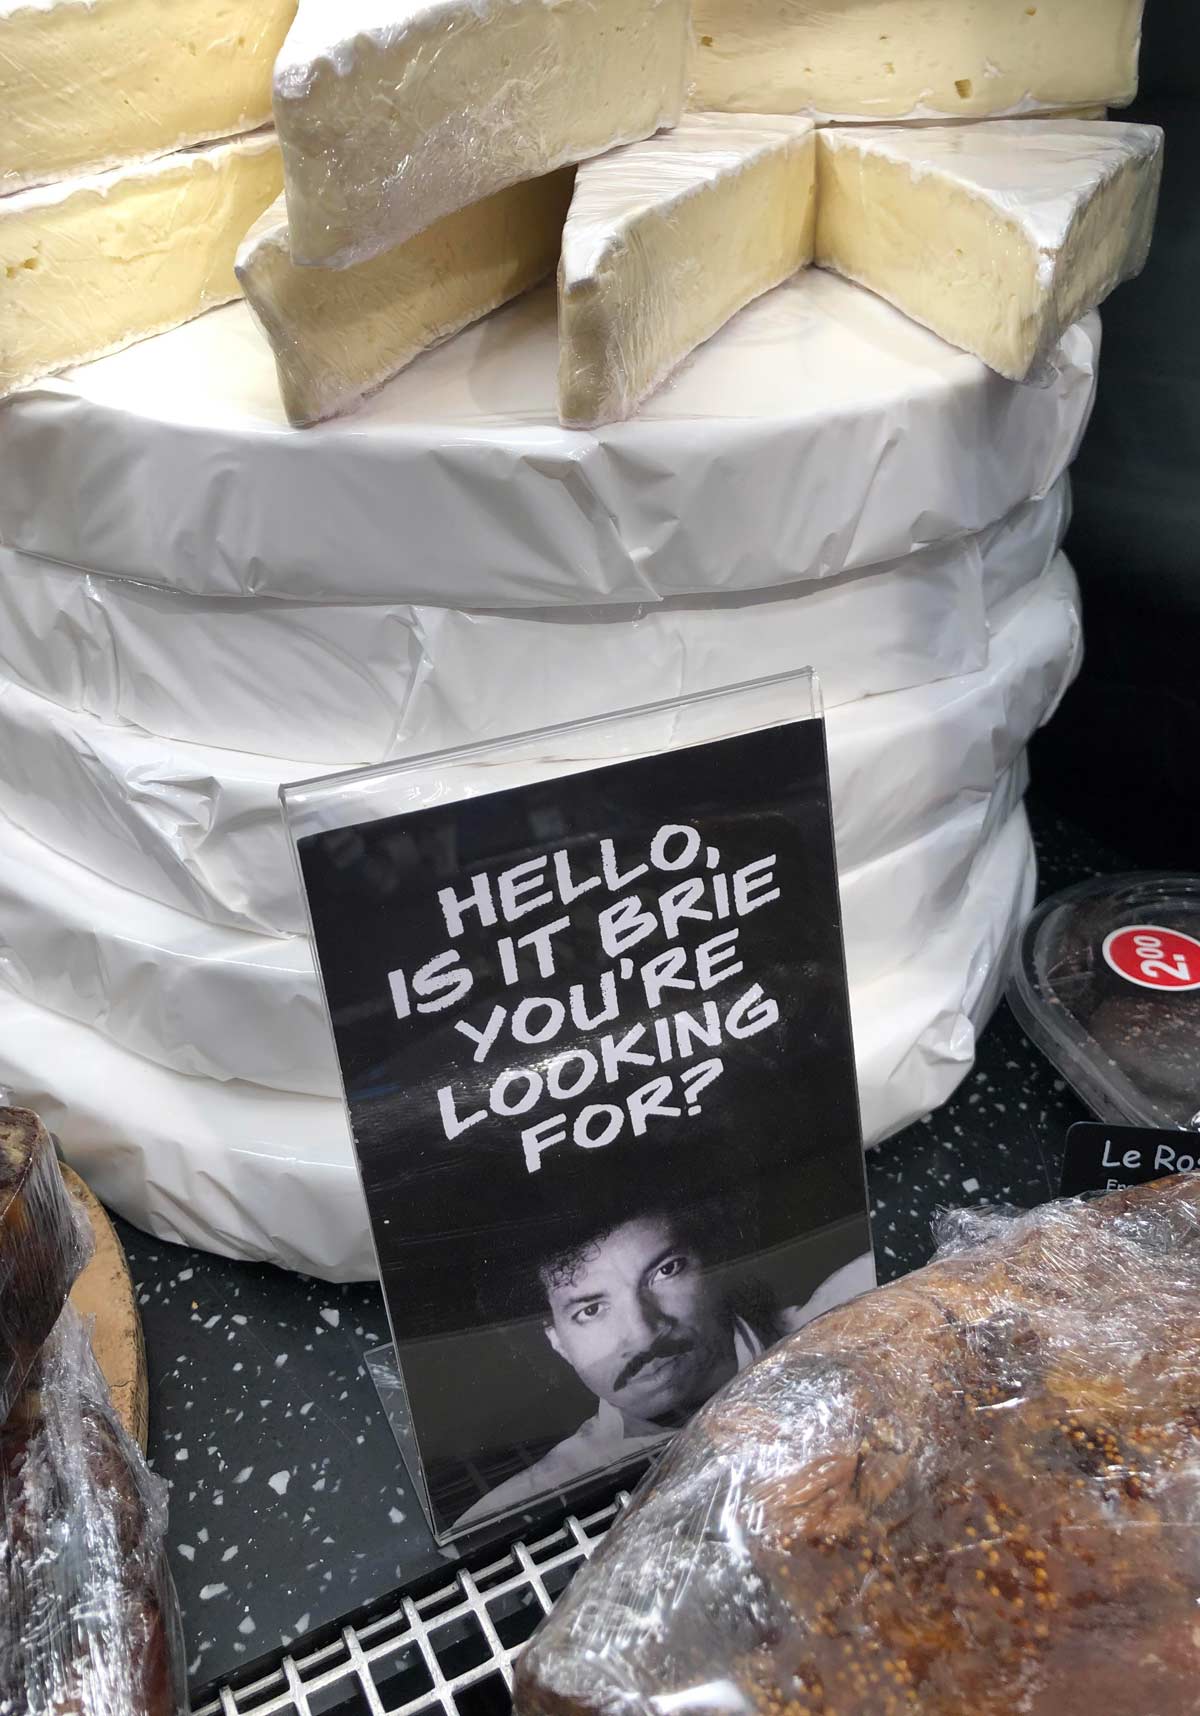 At my local cheese store